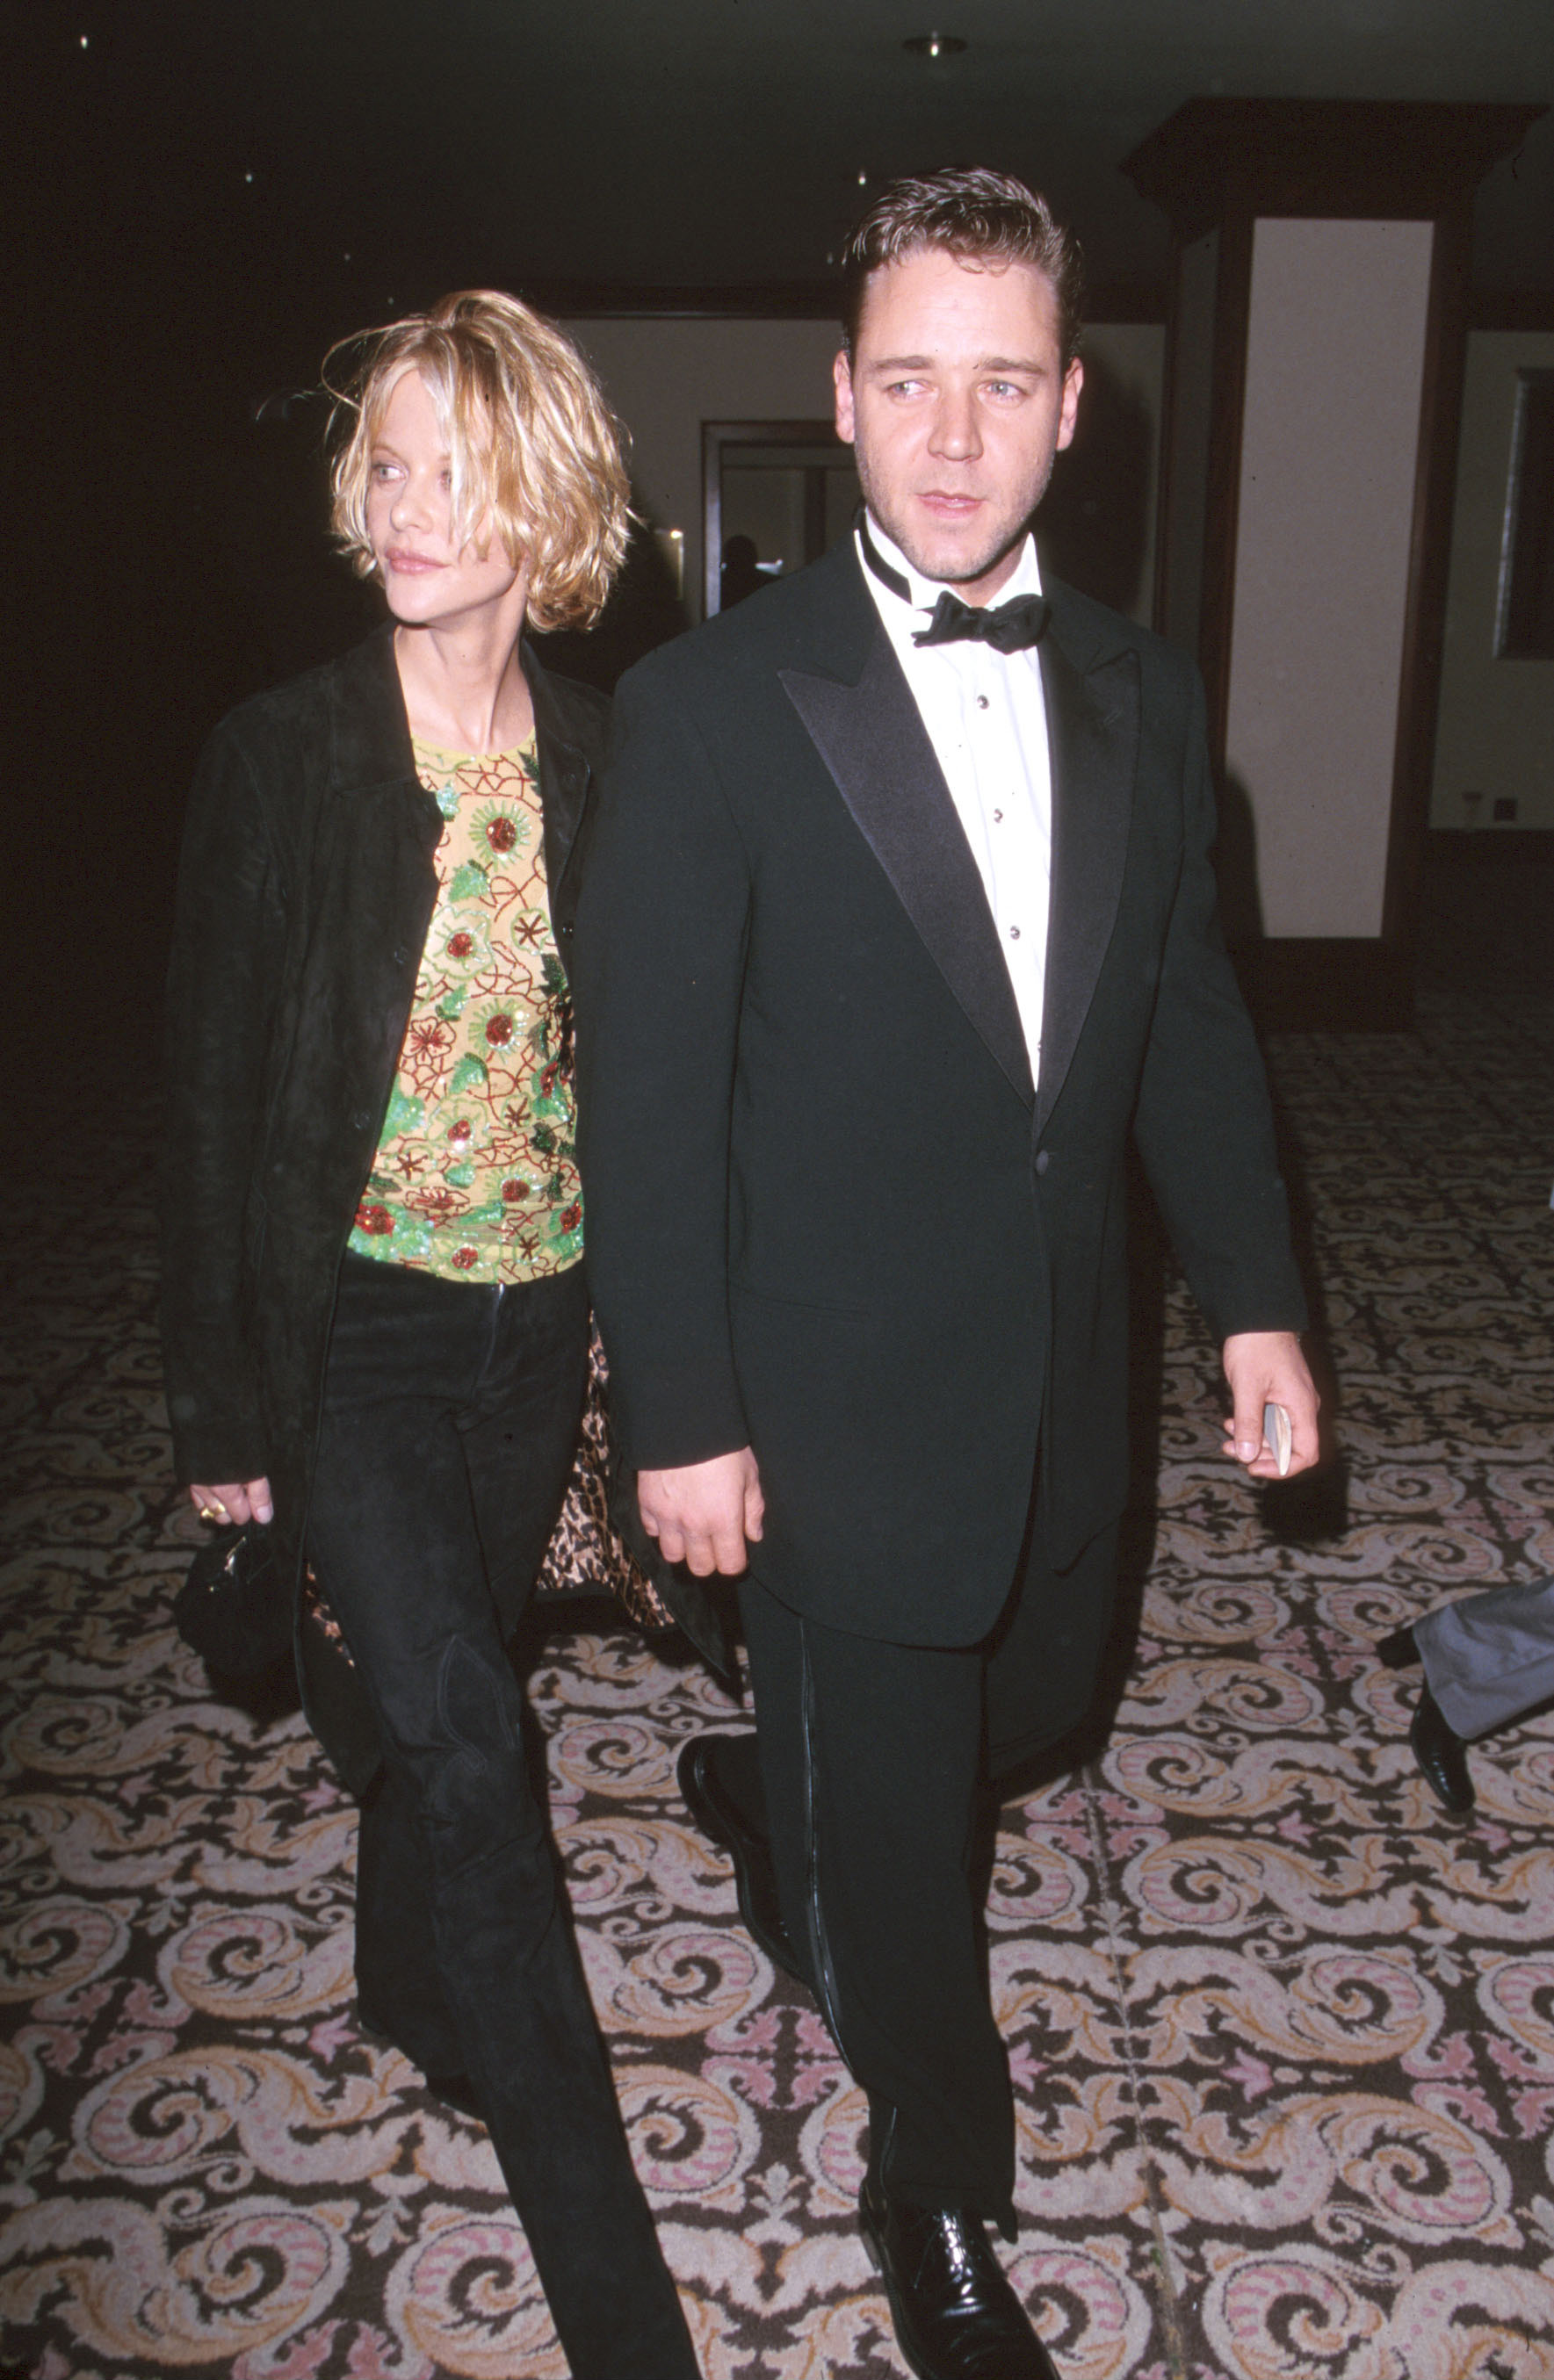 <p>Meg Ryan seemed to be happily married to Dennis Quaid when she met Russell Crowe (seen here) while filming 2000's "Proof of Life." They made headlines after starting a steamy affair, and Meg and Dennis split after nearly 10 years of marriage. Years later, Meg alleged that Dennis had cheated long before she did.</p>